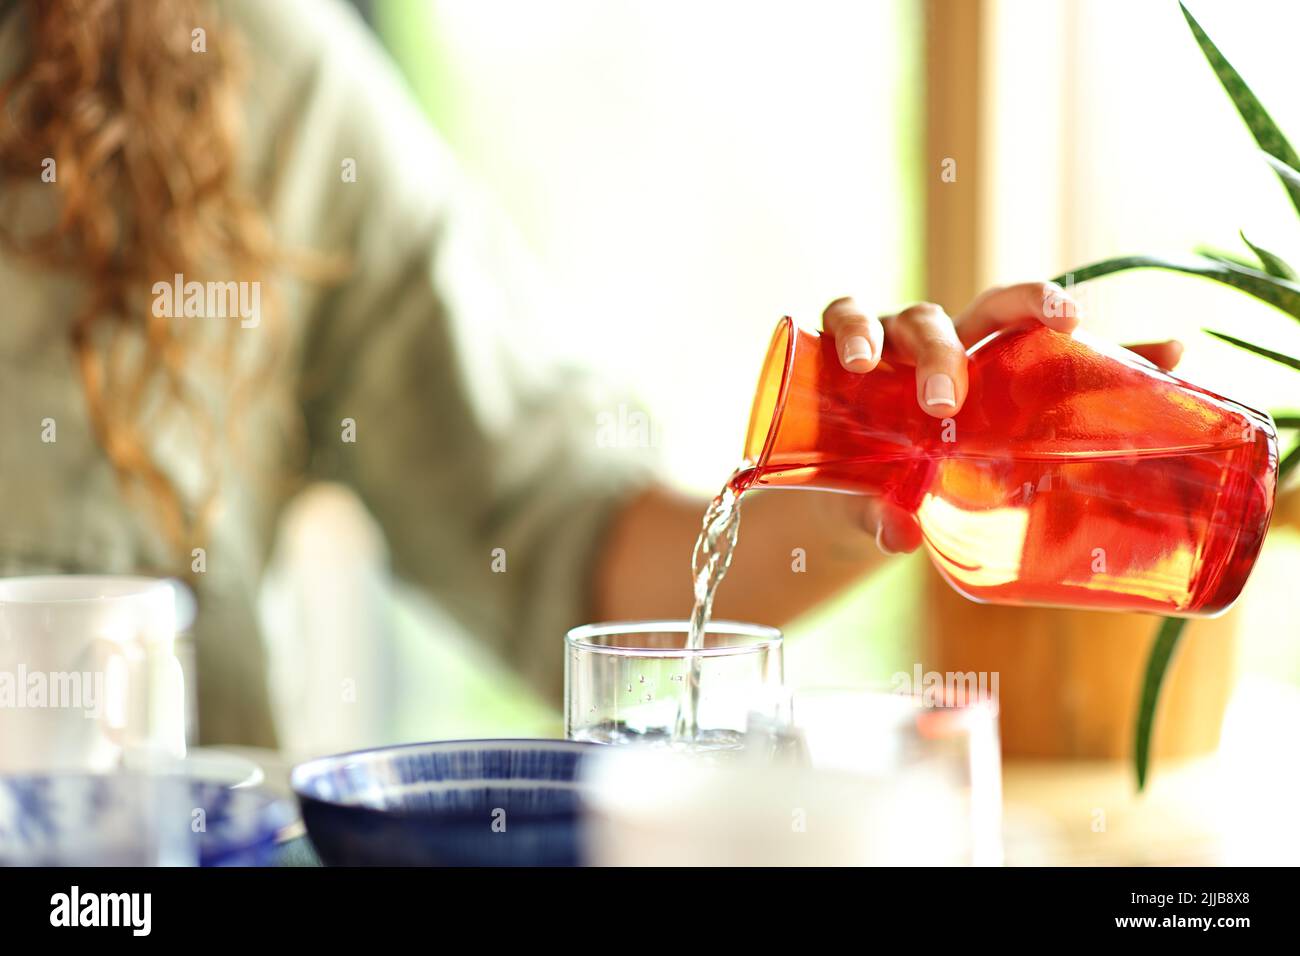 Close up portrait of a woman hand pouring water into a glass in a restaurant Stock Photo